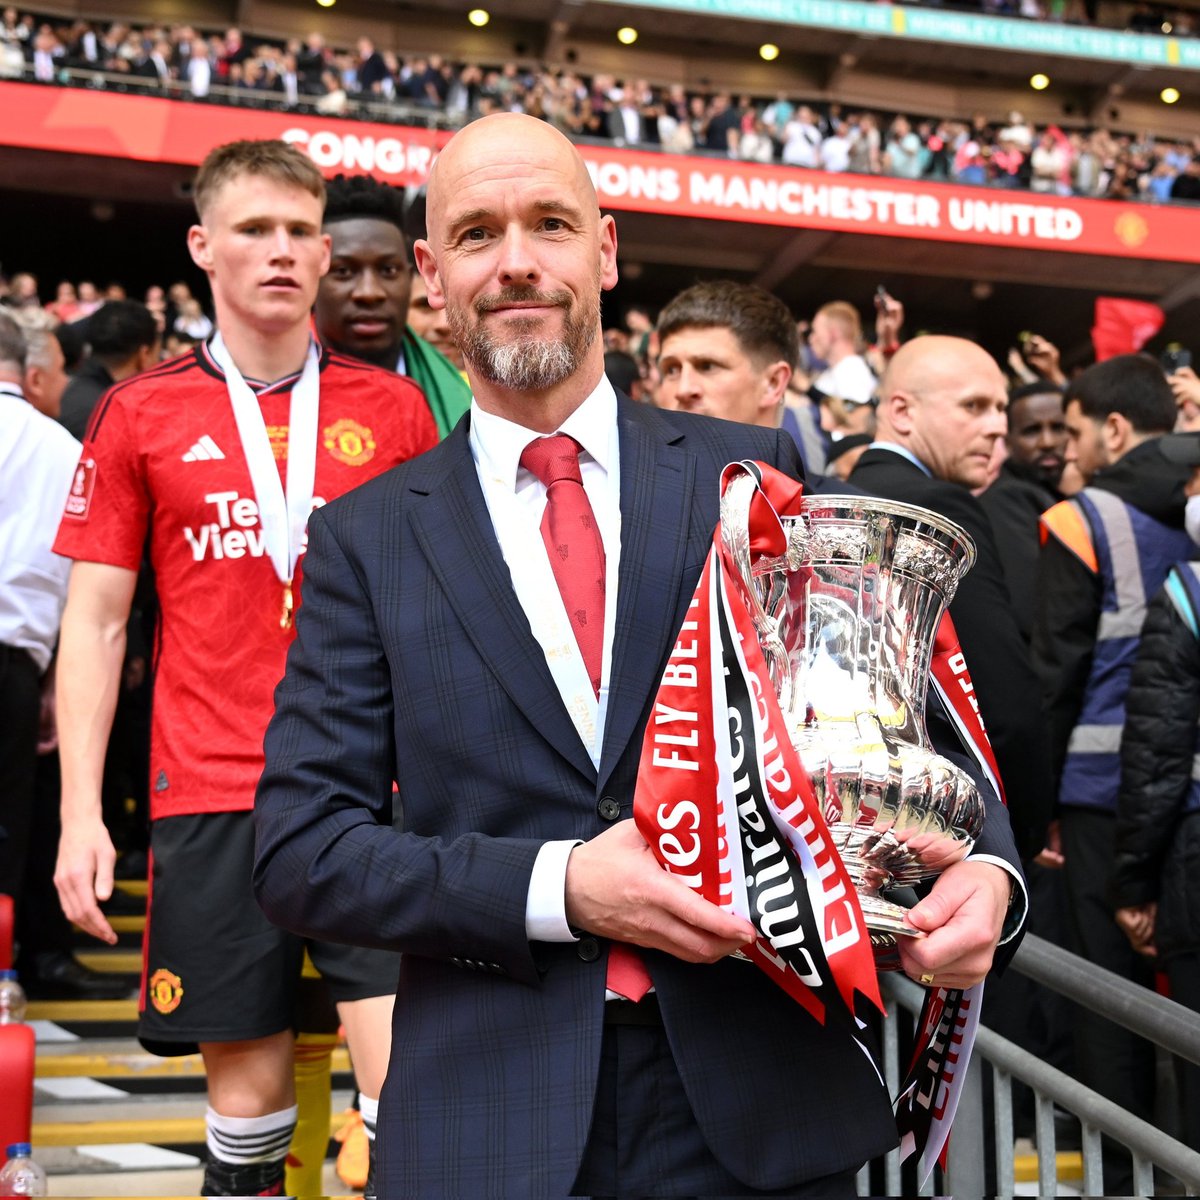 Bullish Erik Ten Hag fires a salvo at @ManUtd owners: “If they don’t want me anymore, I’ll go somewhere else and win trophies. That’s what I’ve done my whole career.” I love the defiant message/gesture.